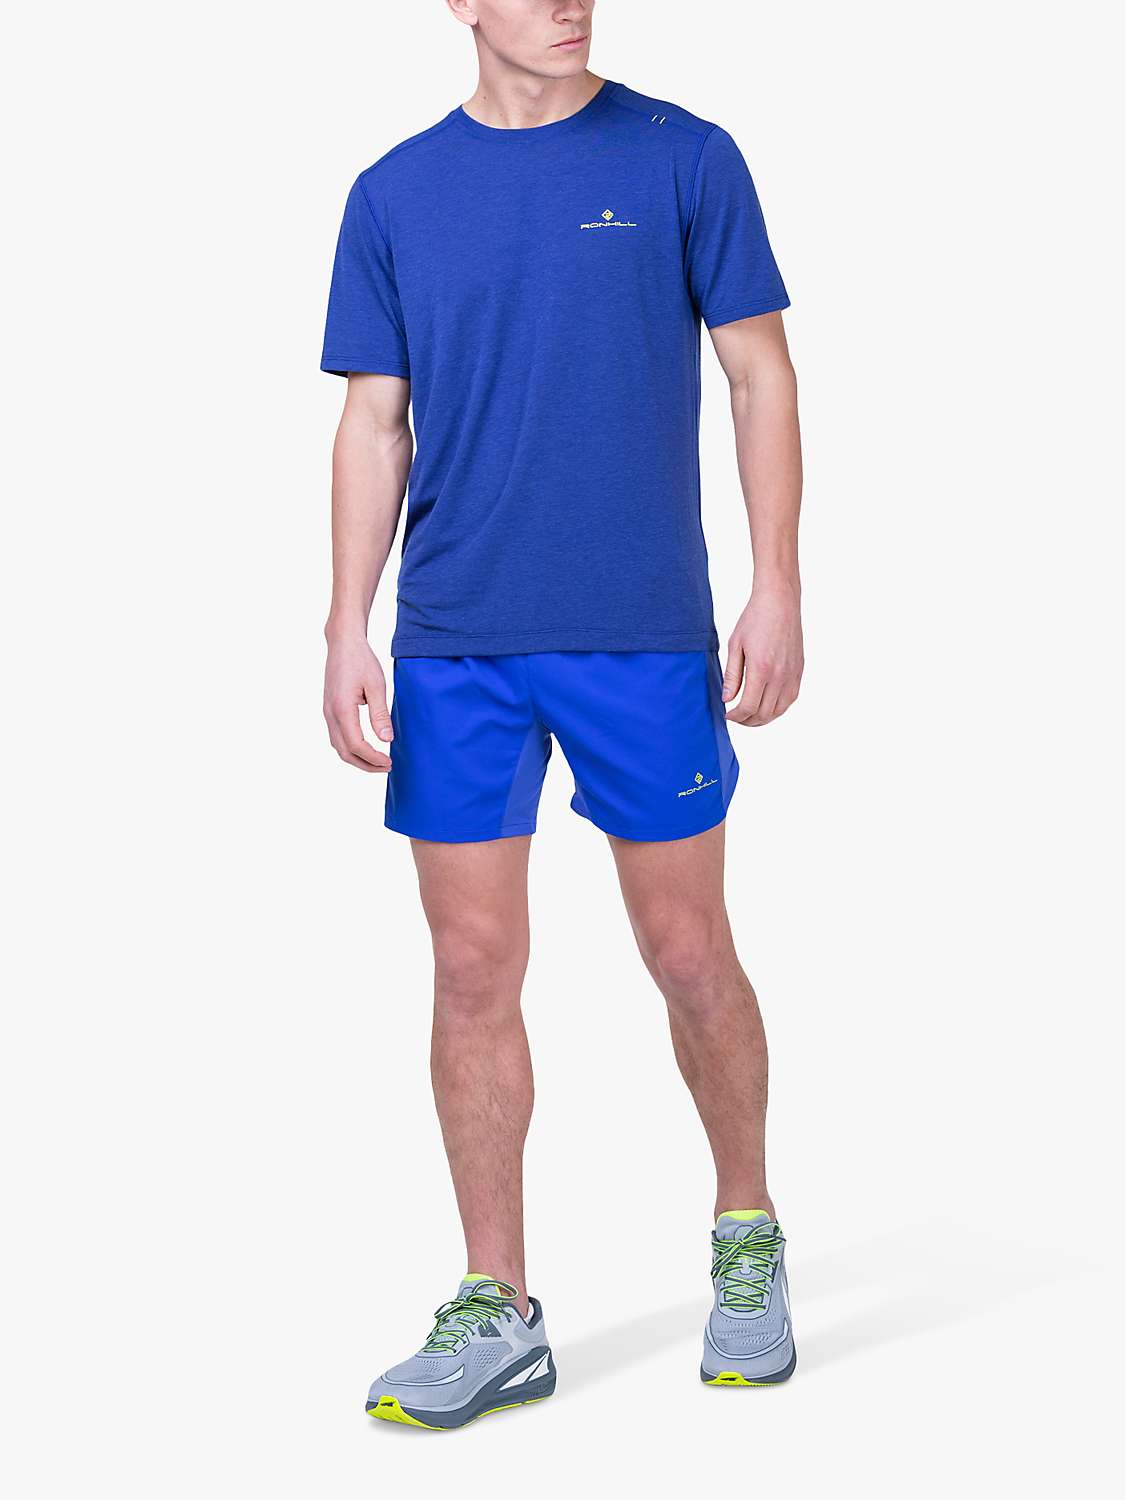 Buy Ronhill Performance T-Shirt, Blue Online at johnlewis.com